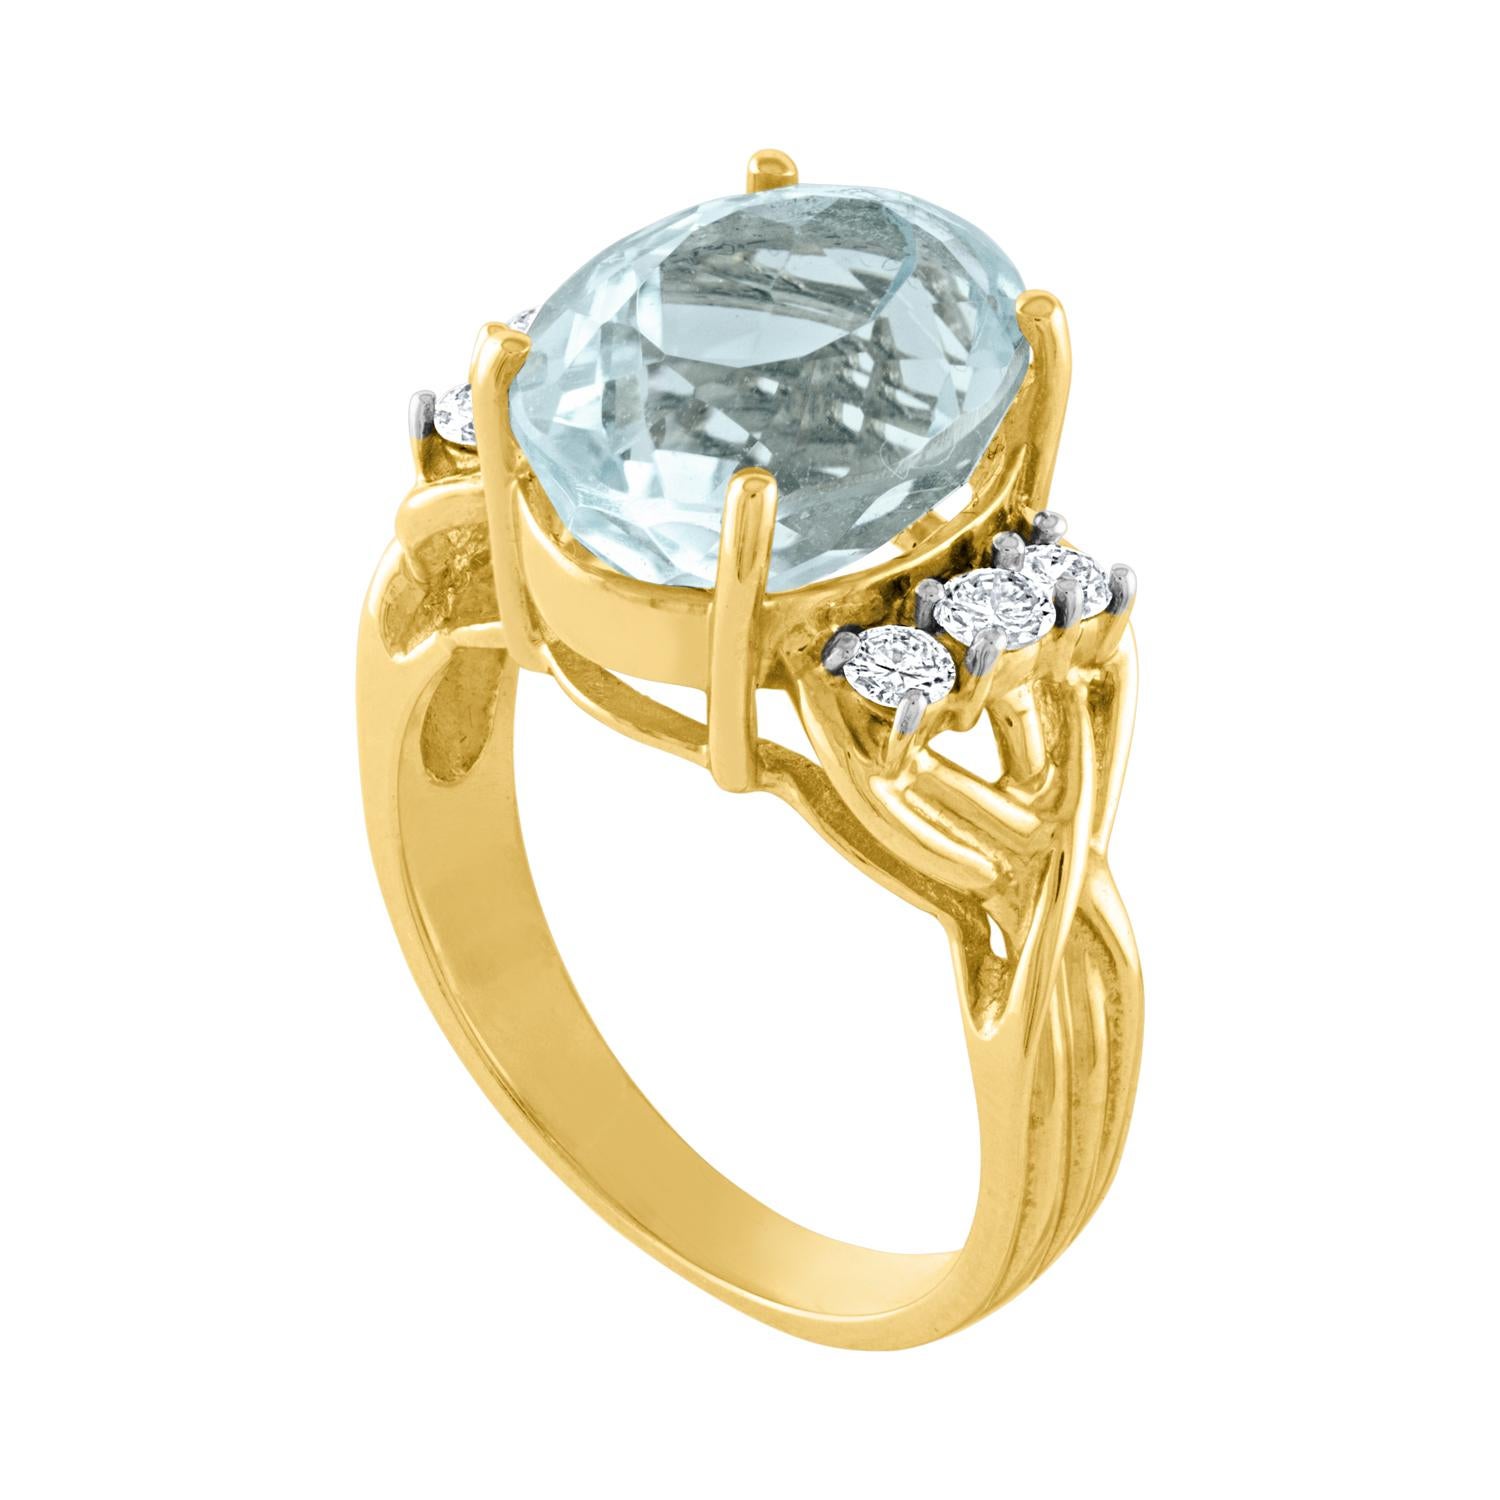 Beautiful Blue Topaz Ring
The ring is 14K Yellow Gold
The center stone is 5.00 Carats Oval Blue Topaz
There are 0.25 Carats In Diamonds F/G SI
The ring is a size 6.5, sizable.
The ring  weighs 6.0 grams.